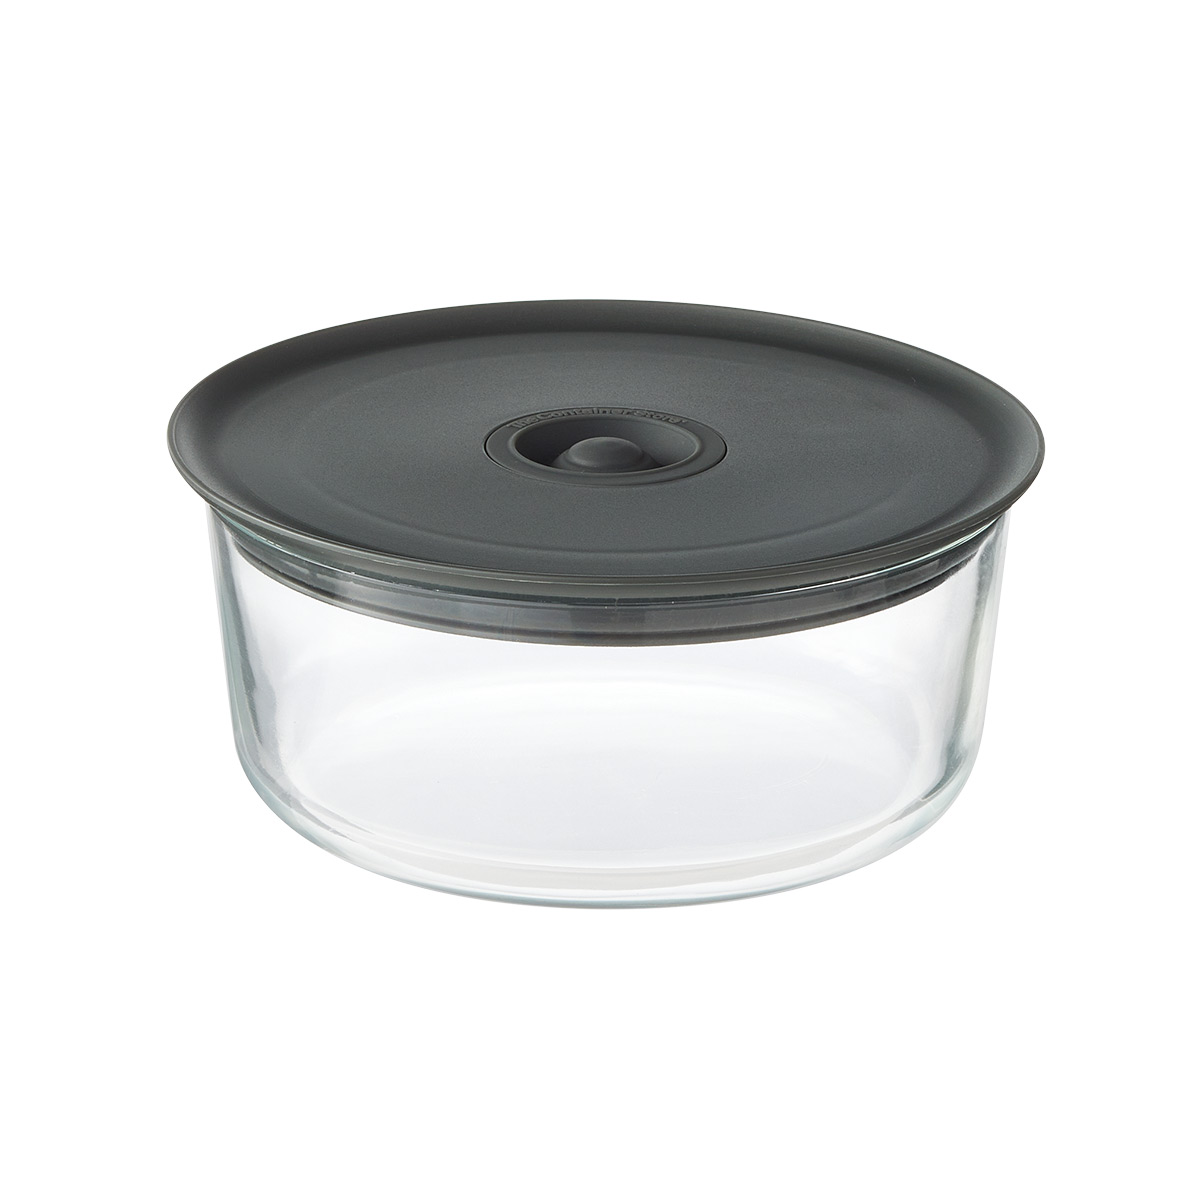 Vent 'N Fresh Round Food Storage | The Container Store